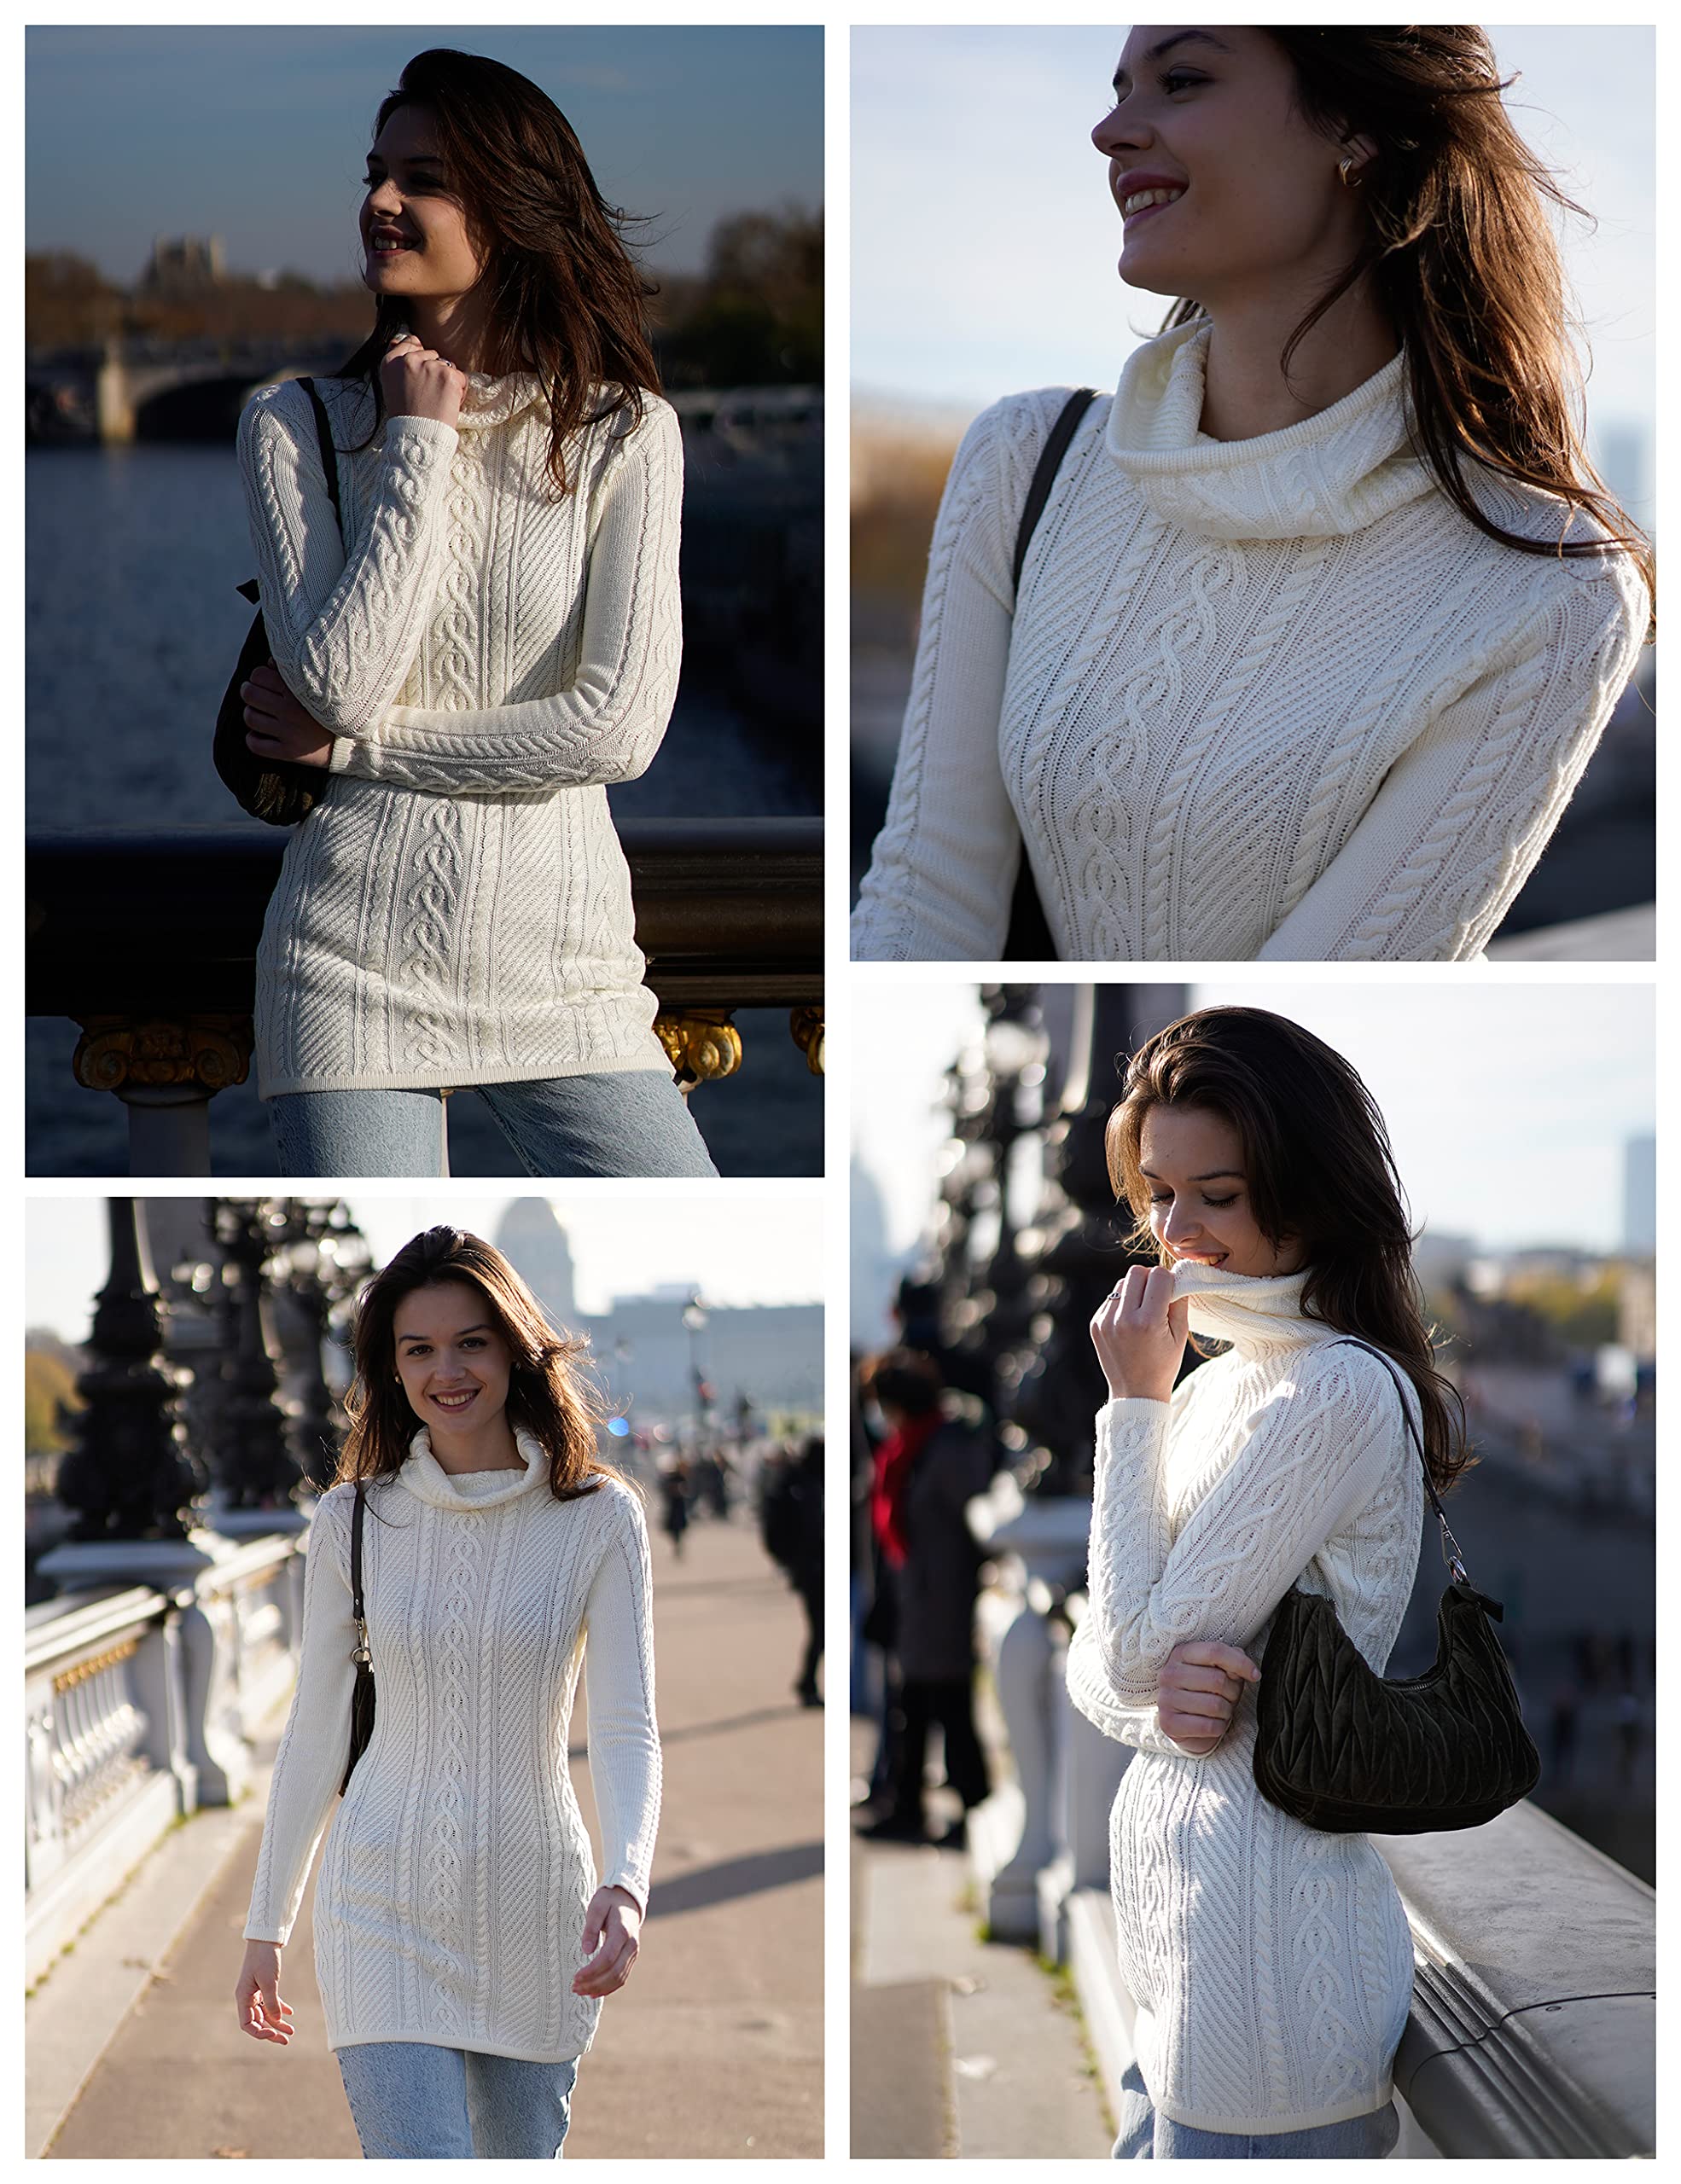 v28 Women Polo Neck Long Slim Fitted Dress Bodycon Turtleneck Cable Knit Sweater